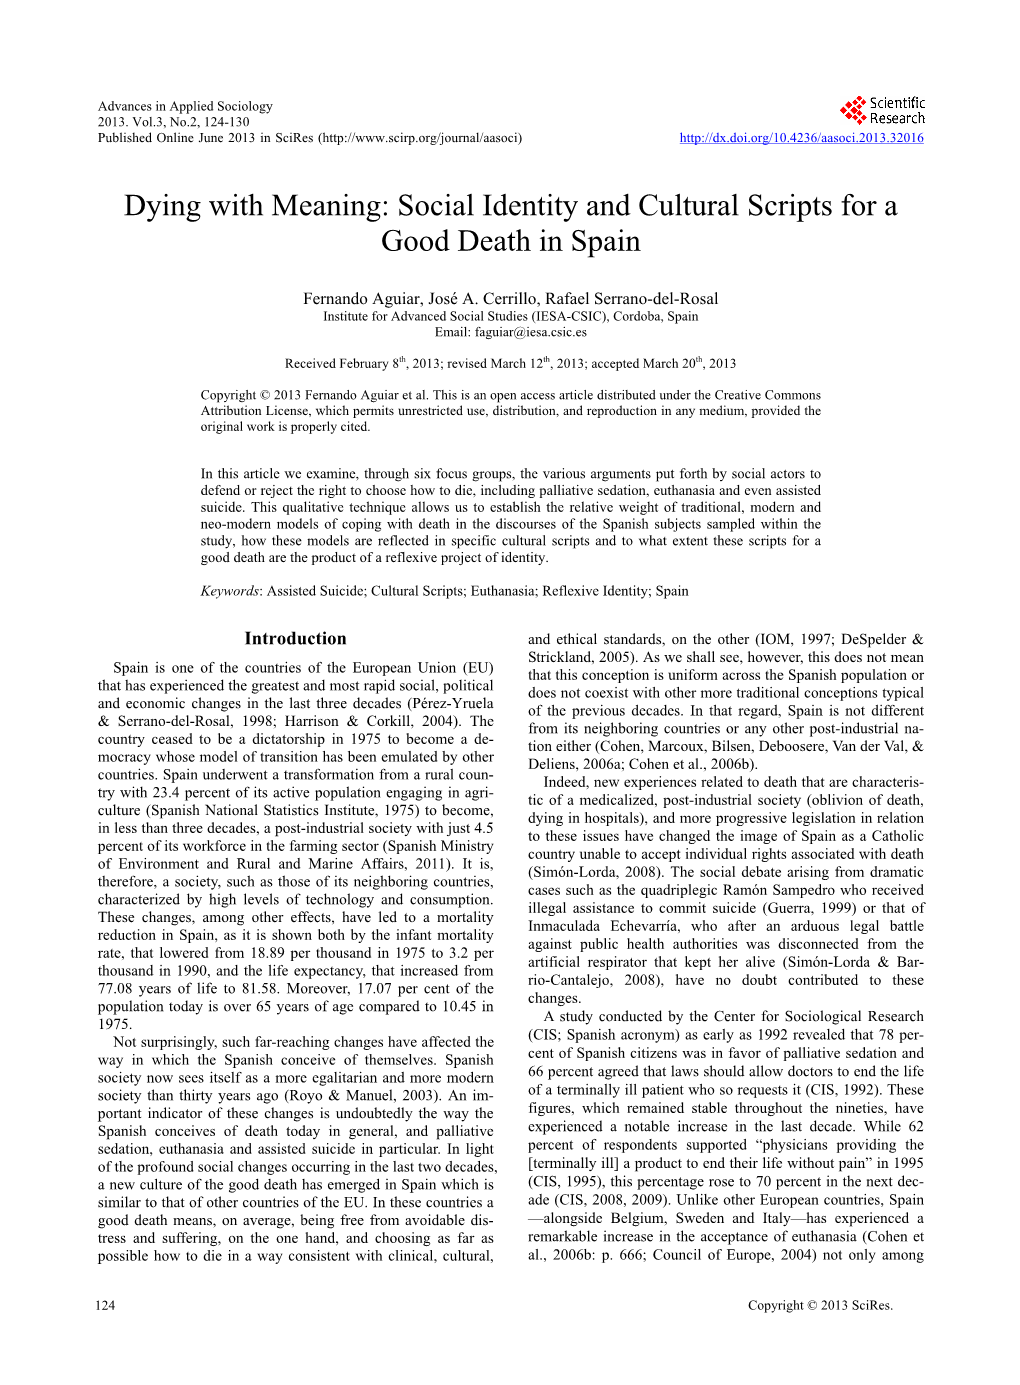 Social Identity and Cultural Scripts for a Good Death in Spain